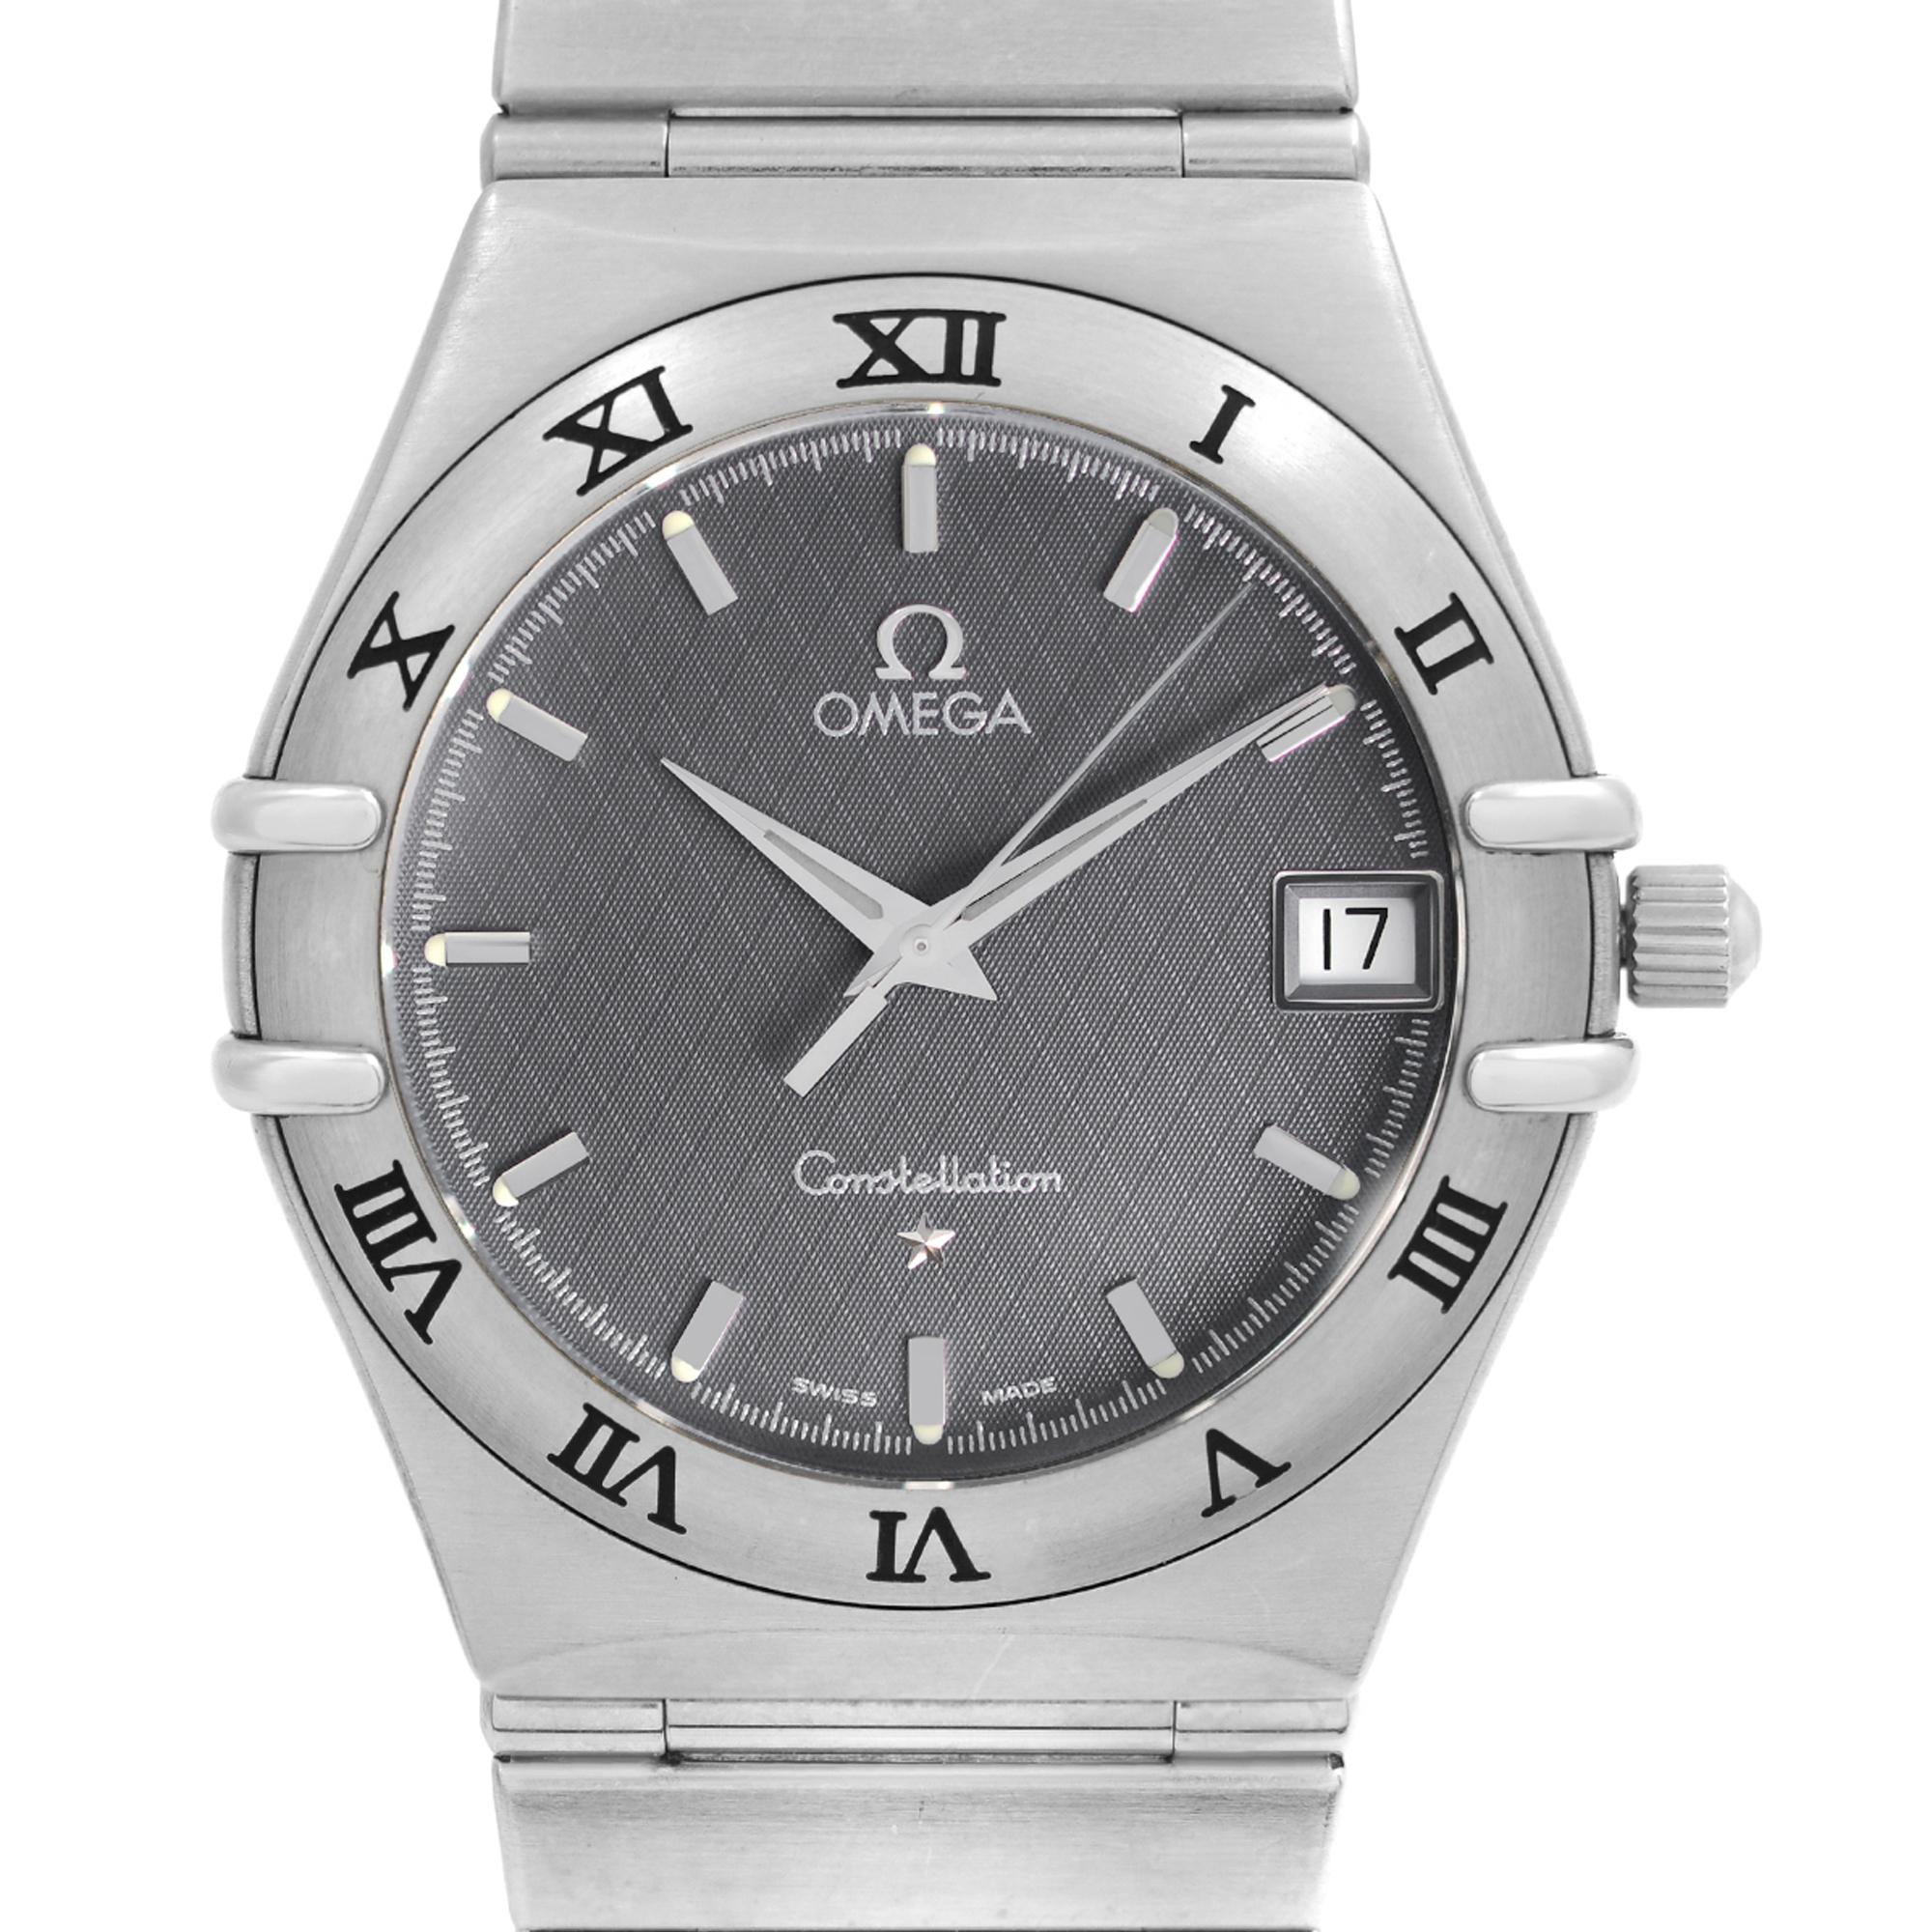 Pre Owned Omega Constellation 33mm Stainless Steel Slate Dial Men's Quartz Watch 3961201. This Beautiful Timepiece is Powered by Quartz (Battery) Movement And Features: Round Stainless Steel Case & Bracelet, Fixed Stainless Steel Bezel with Roman